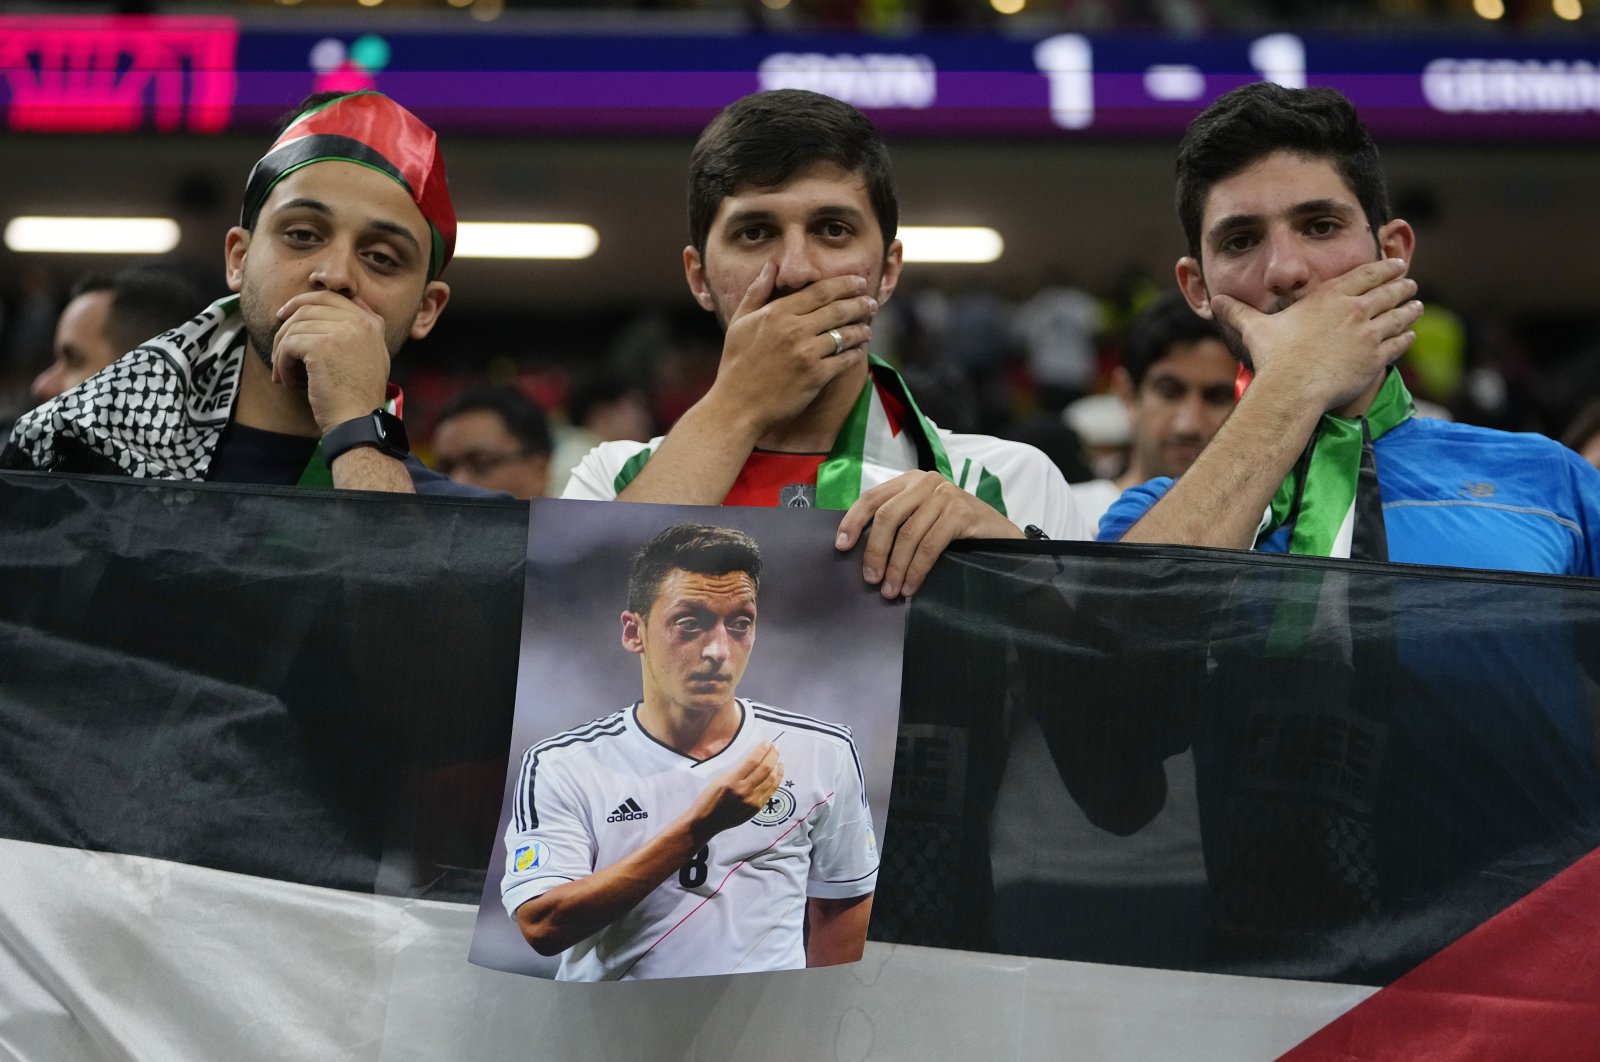 Spectators hold photo of Forman German international Mesut Özil on the stands at the end of the World Cup group E soccer match between Spain and Germany, at the Al Bayt Stadium in Al Khor, Doha, Qatar, Nov. 28, 2022. (AP Photo)